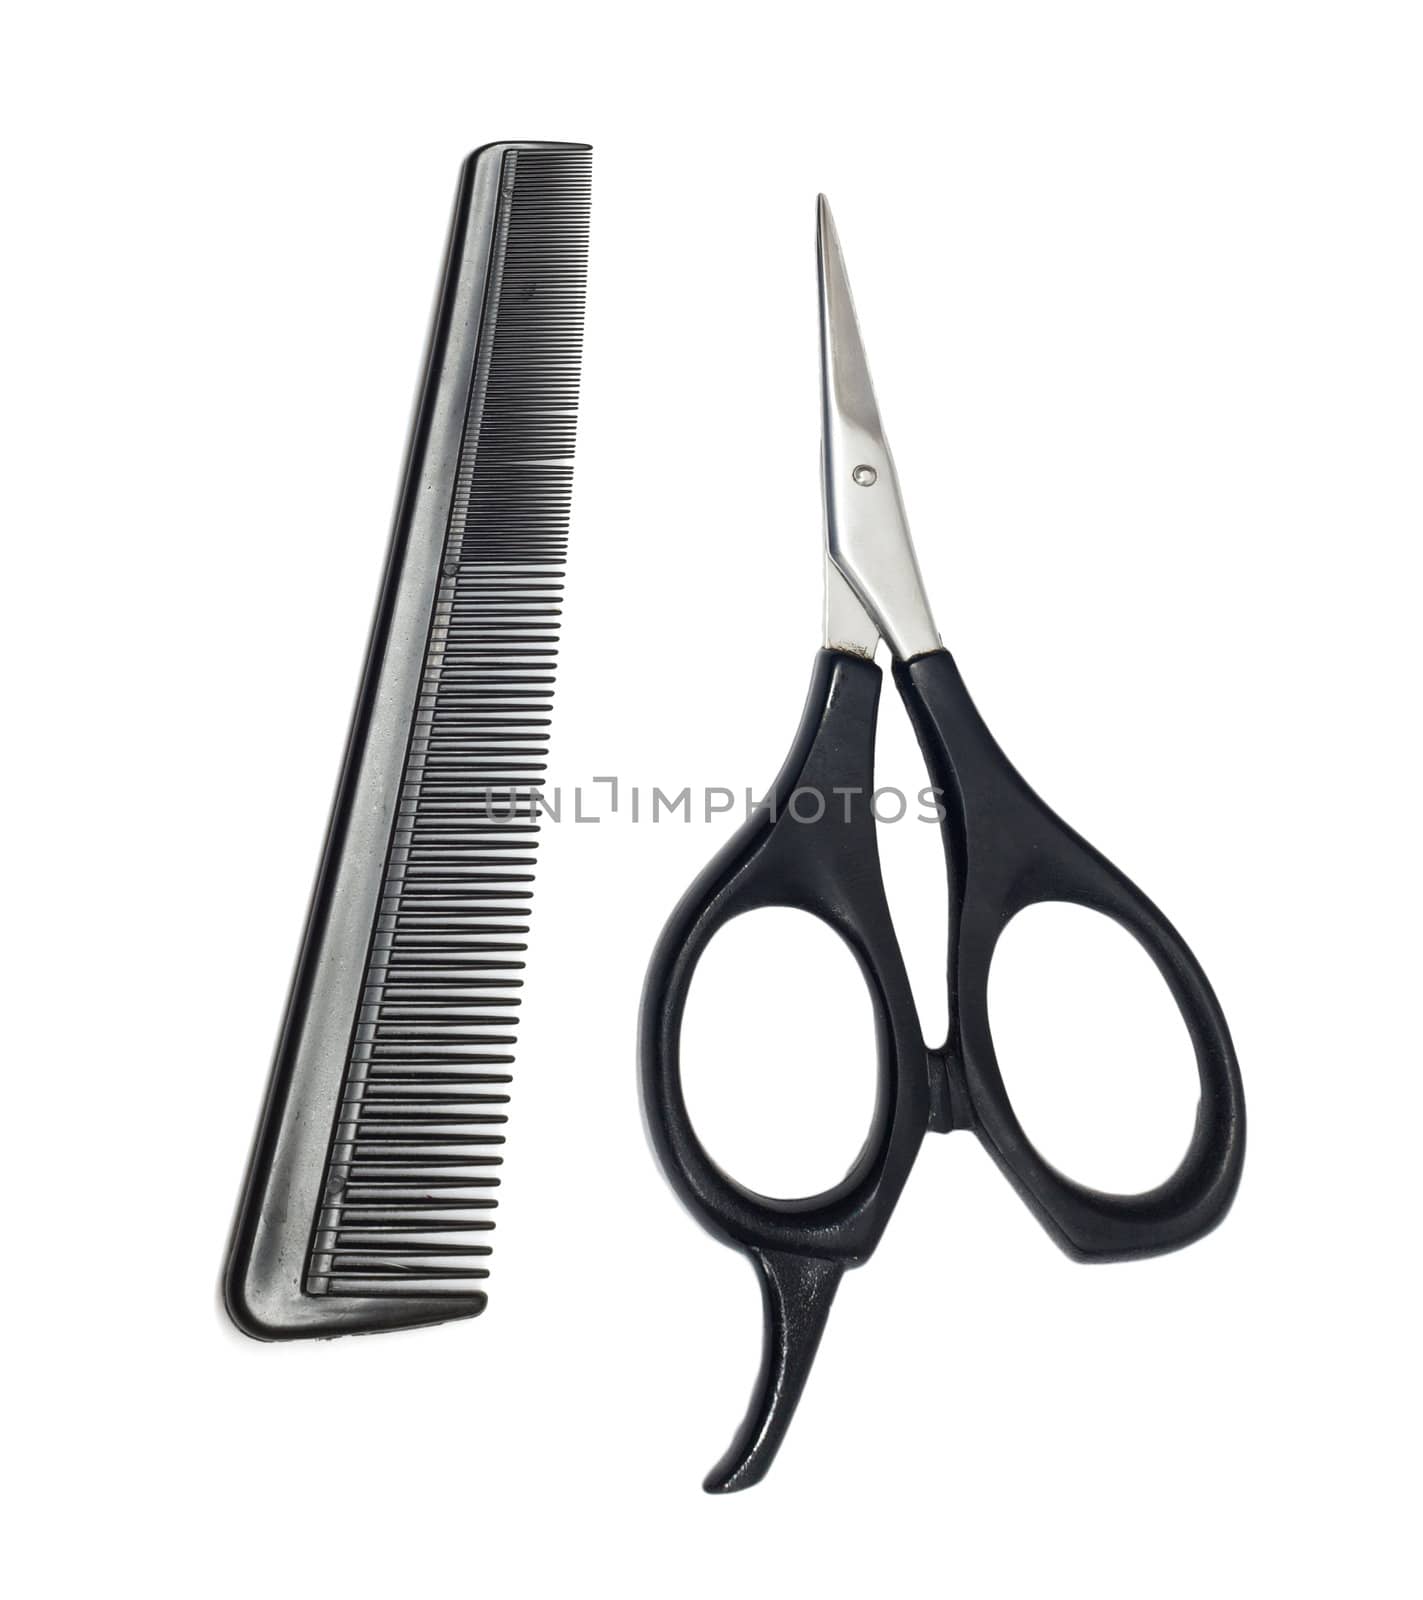 Scissors and comb isolated on white background 